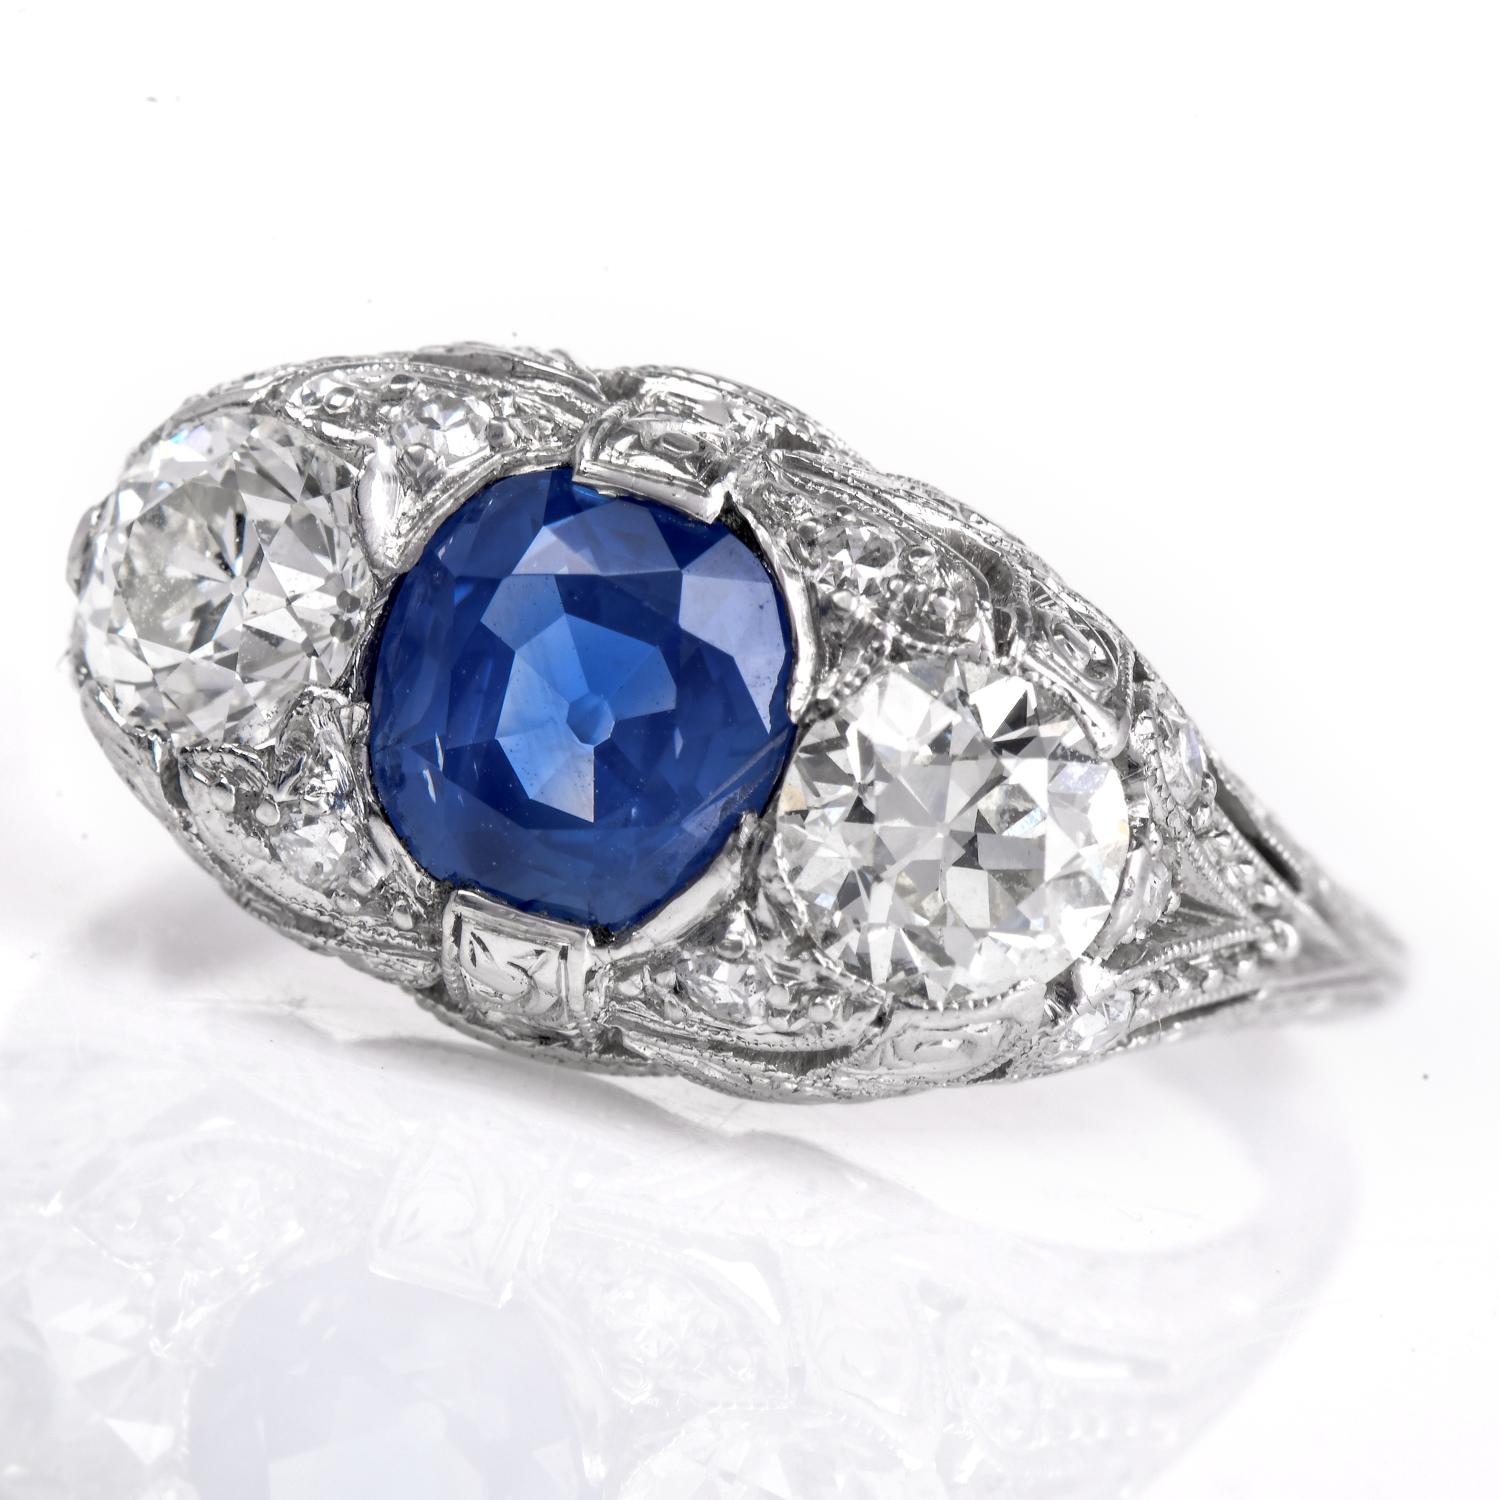 This Rare Antique Natural No heat Kashmir Sapphire Diamond Three Stone Engagement Ring boasts beauty with an approximate total weight of 5.8 grams. 

This vintage three-stone sapphire diamond ring is crafted in solid Platinum, Featuring a 1.69 Carat